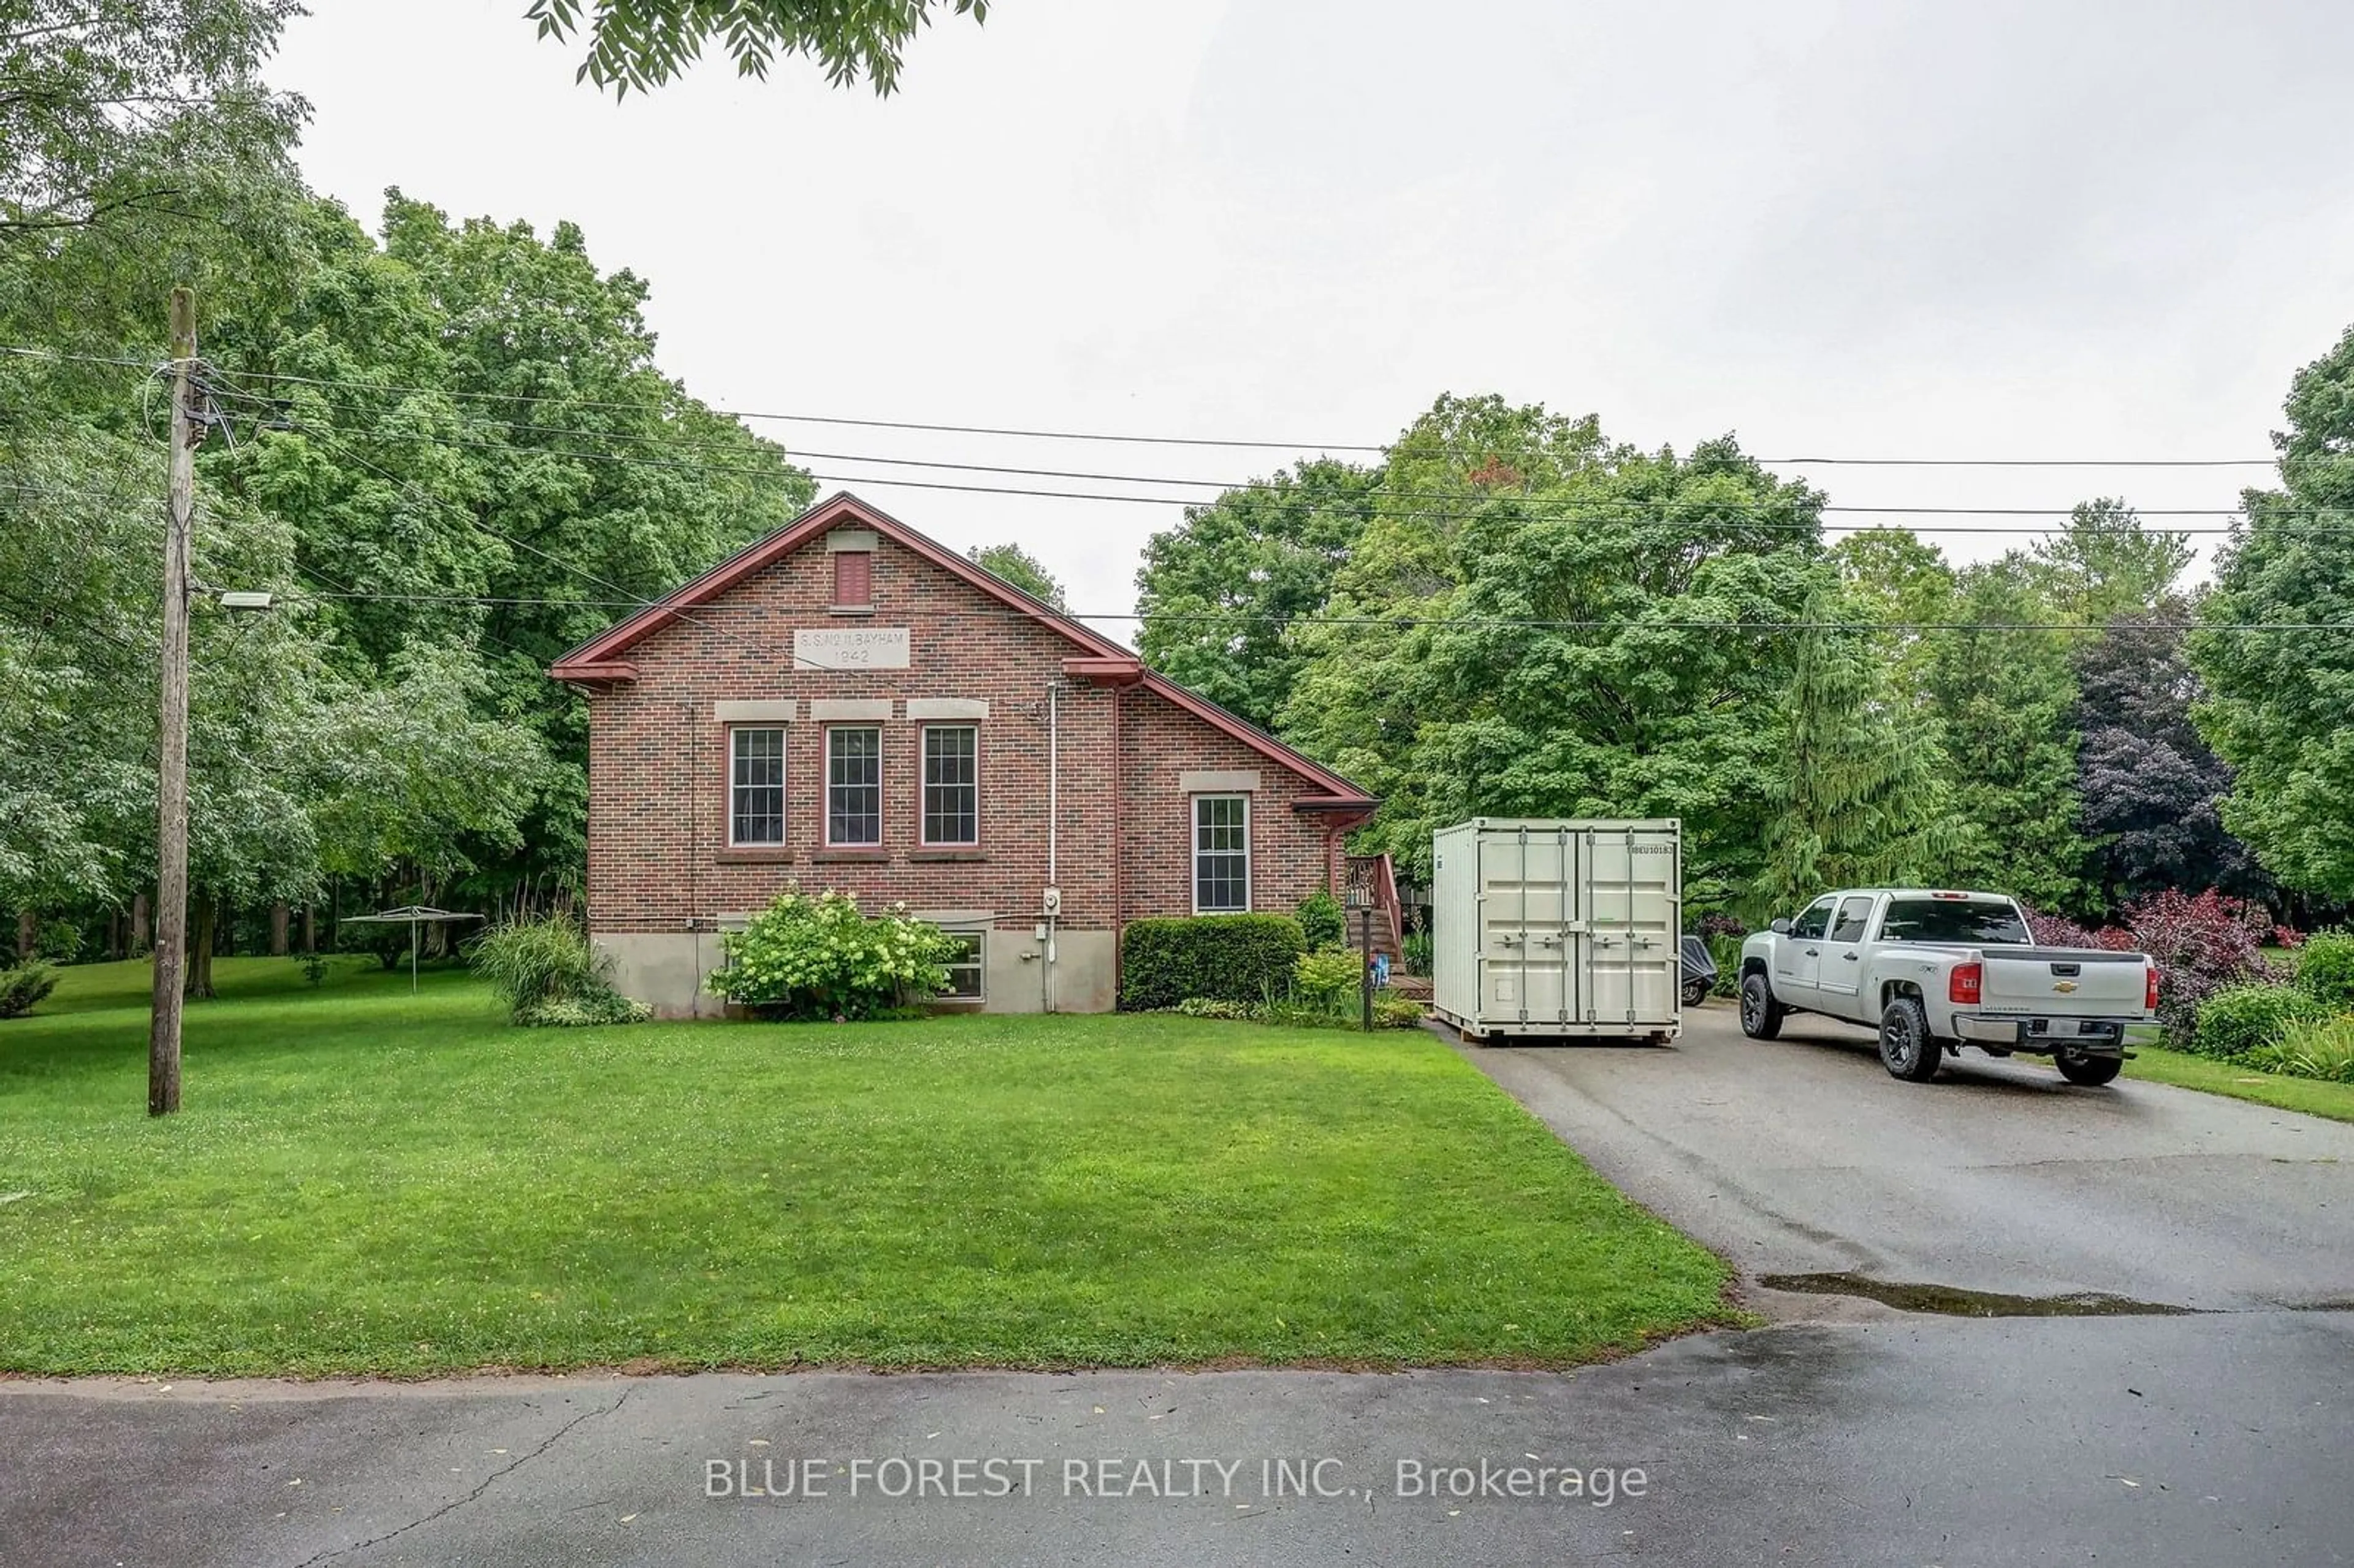 Frontside or backside of a home for 53911 Church St, Aylmer Ontario N5H 2R1